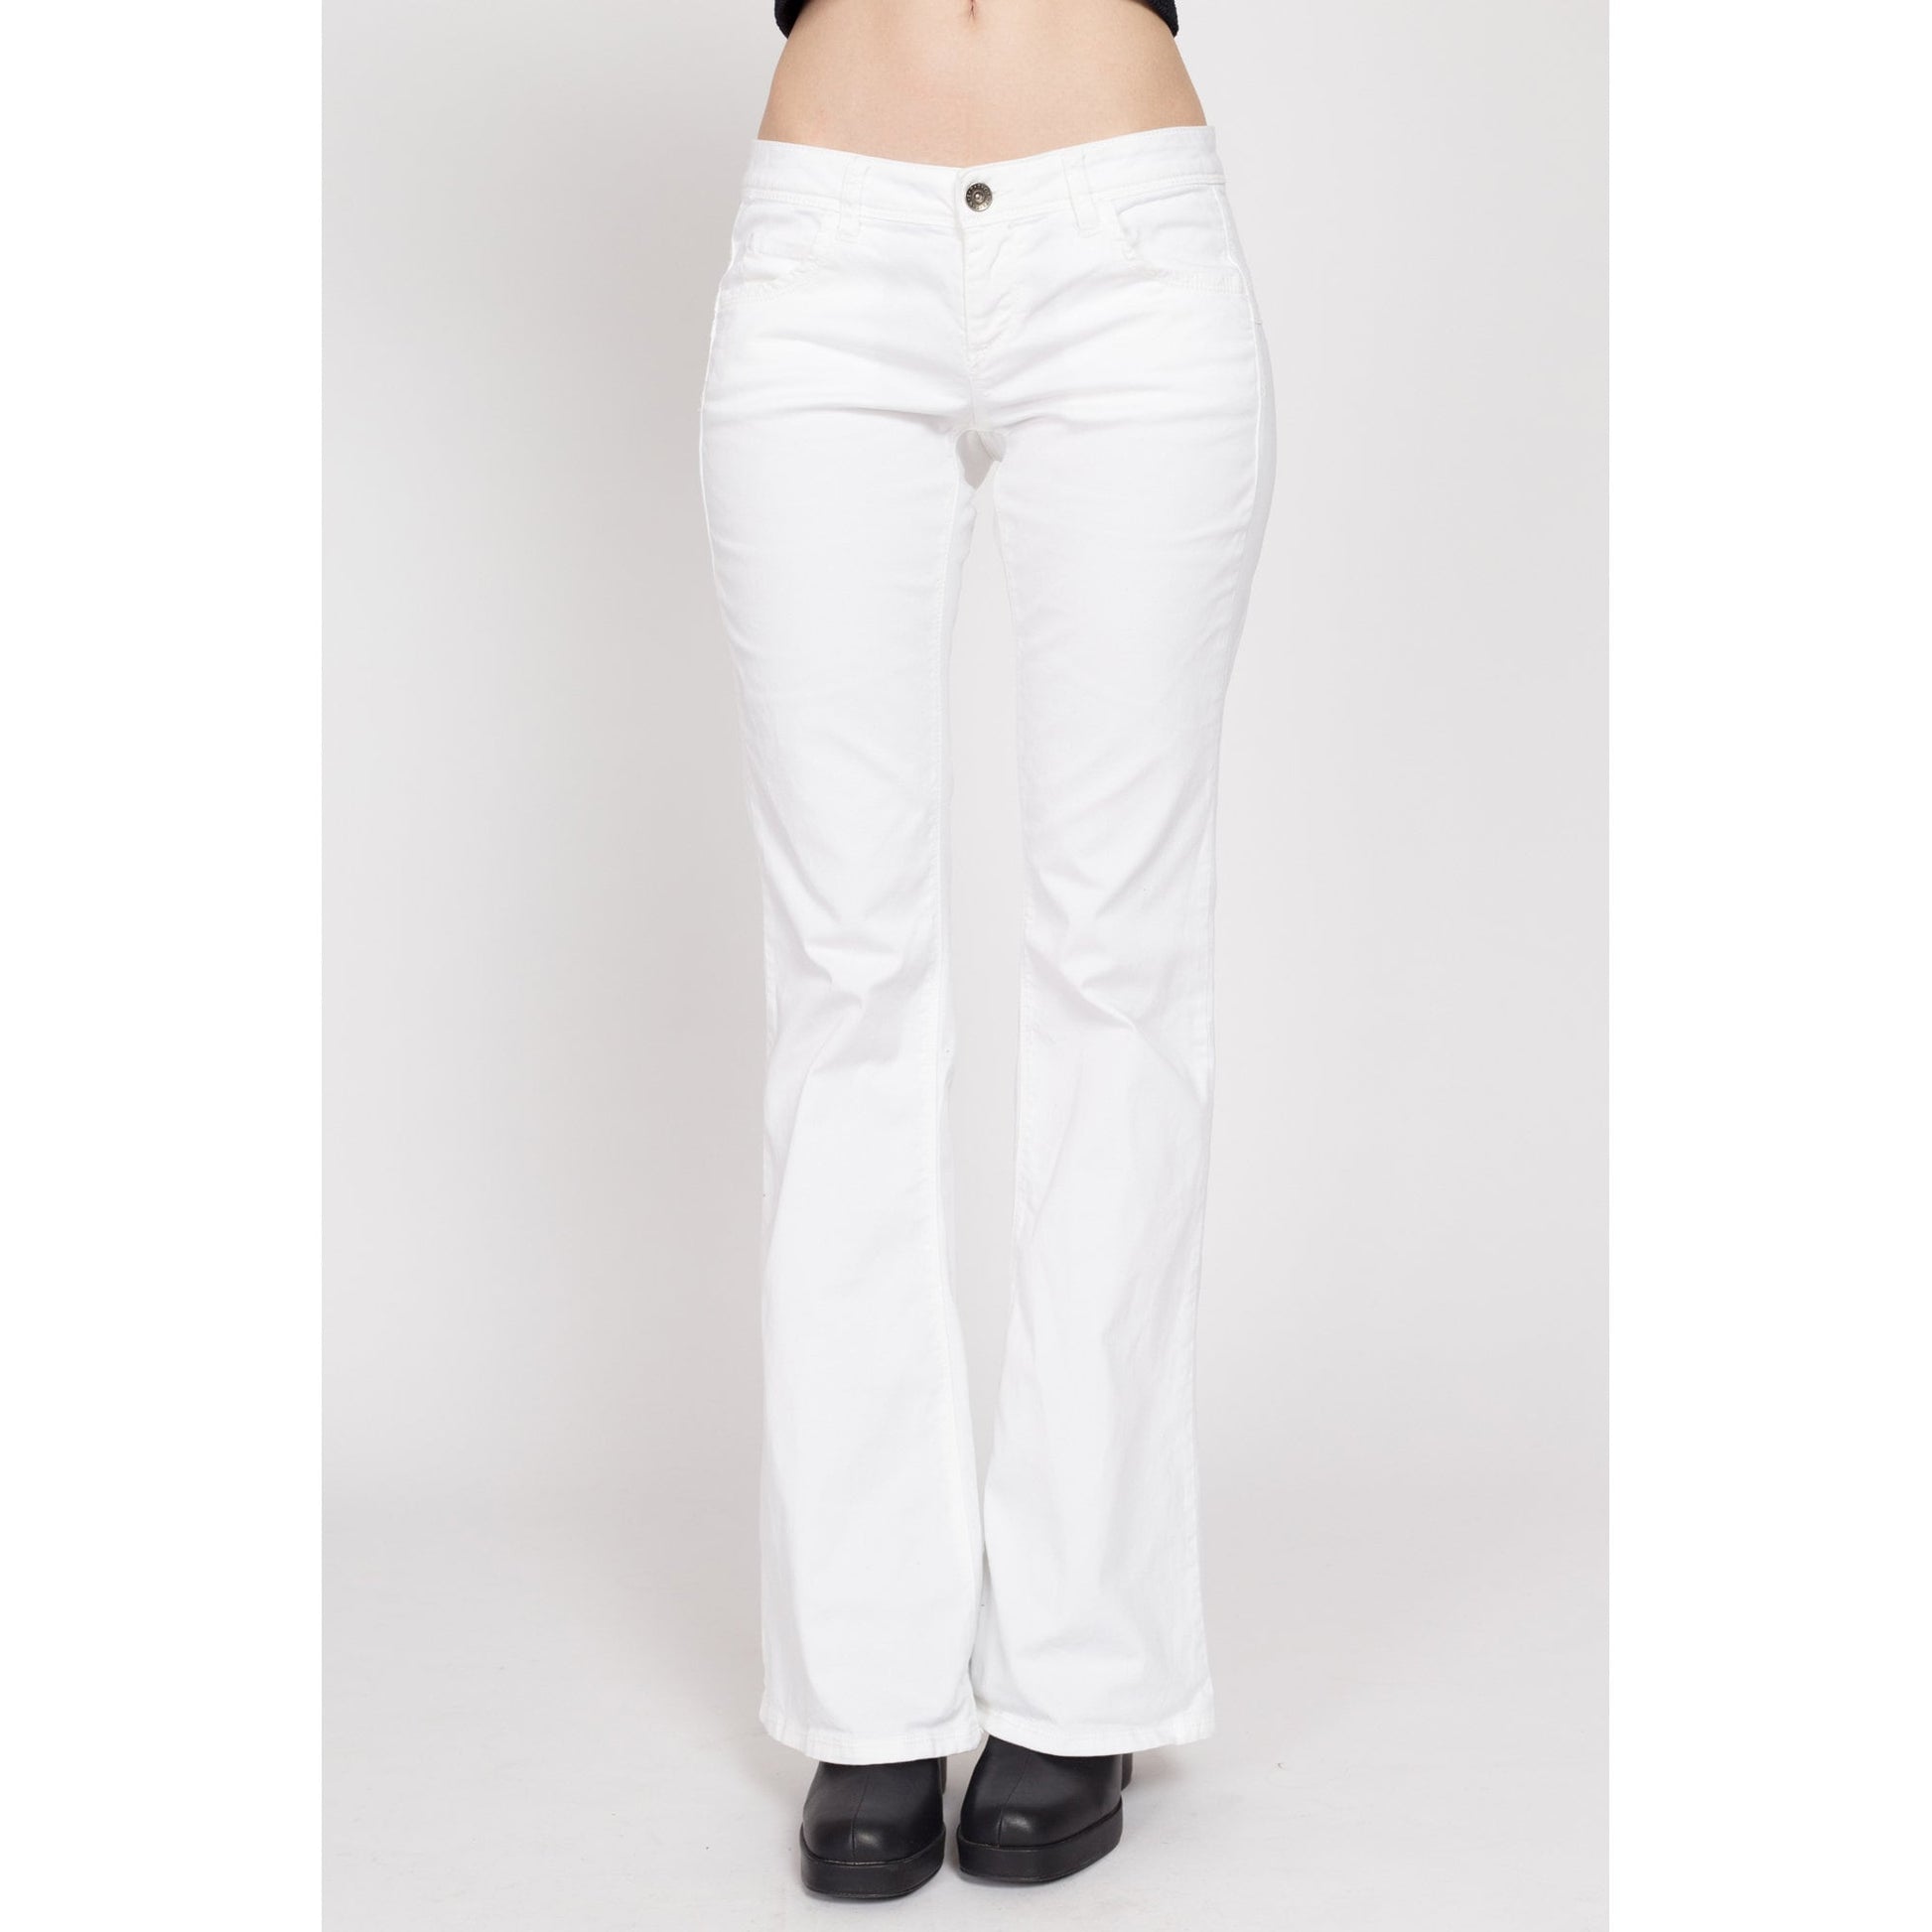 Small Y2K United Colors of Benetton White Low Rise Flares | Vintage Twill Bell Bottoms Low Rider Flared Pants